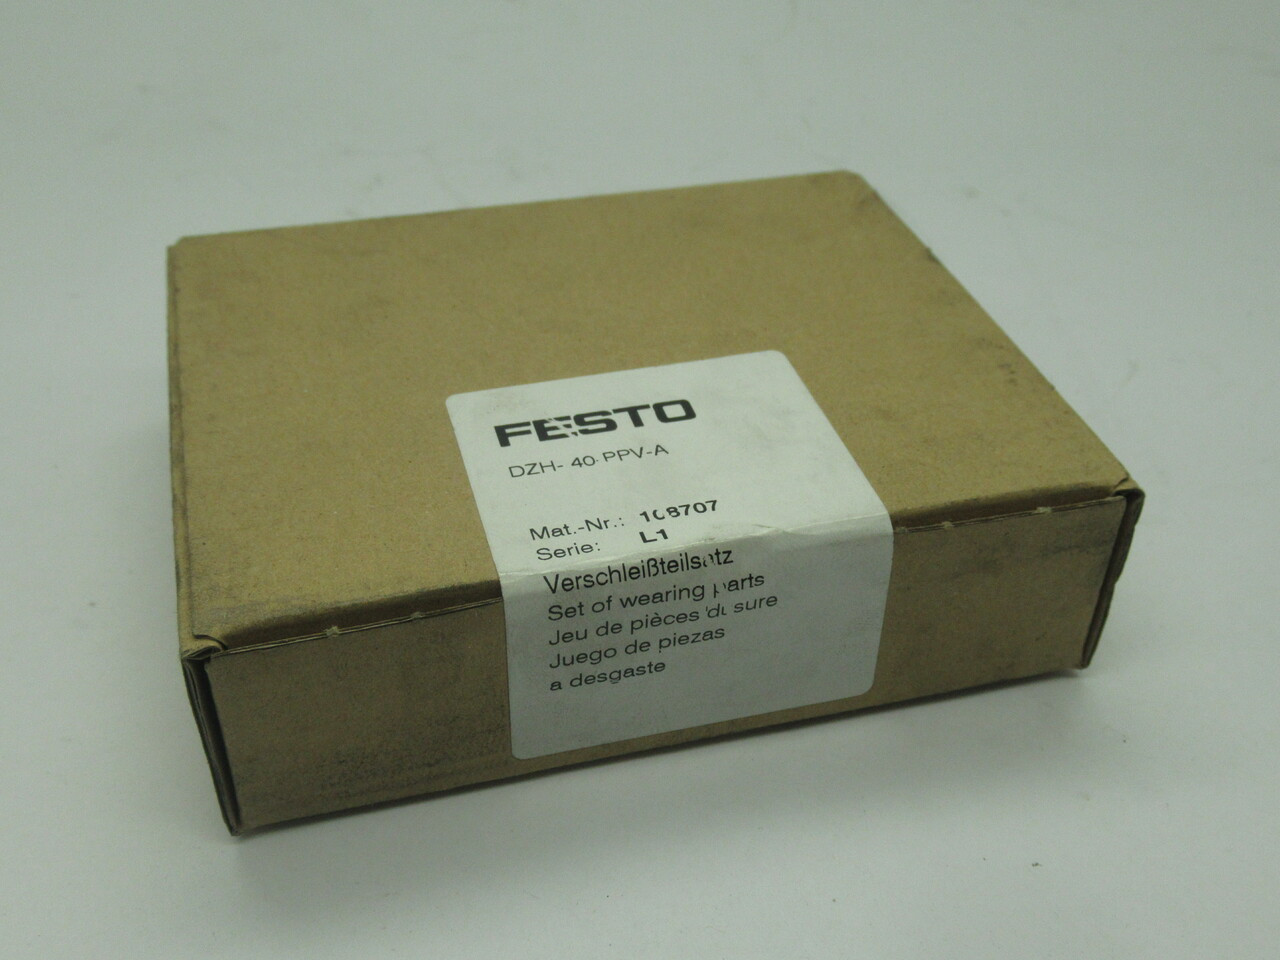 Festo 108707 DZH-40-PPV-A Set Of Wearing Parts *Sealed* NEW